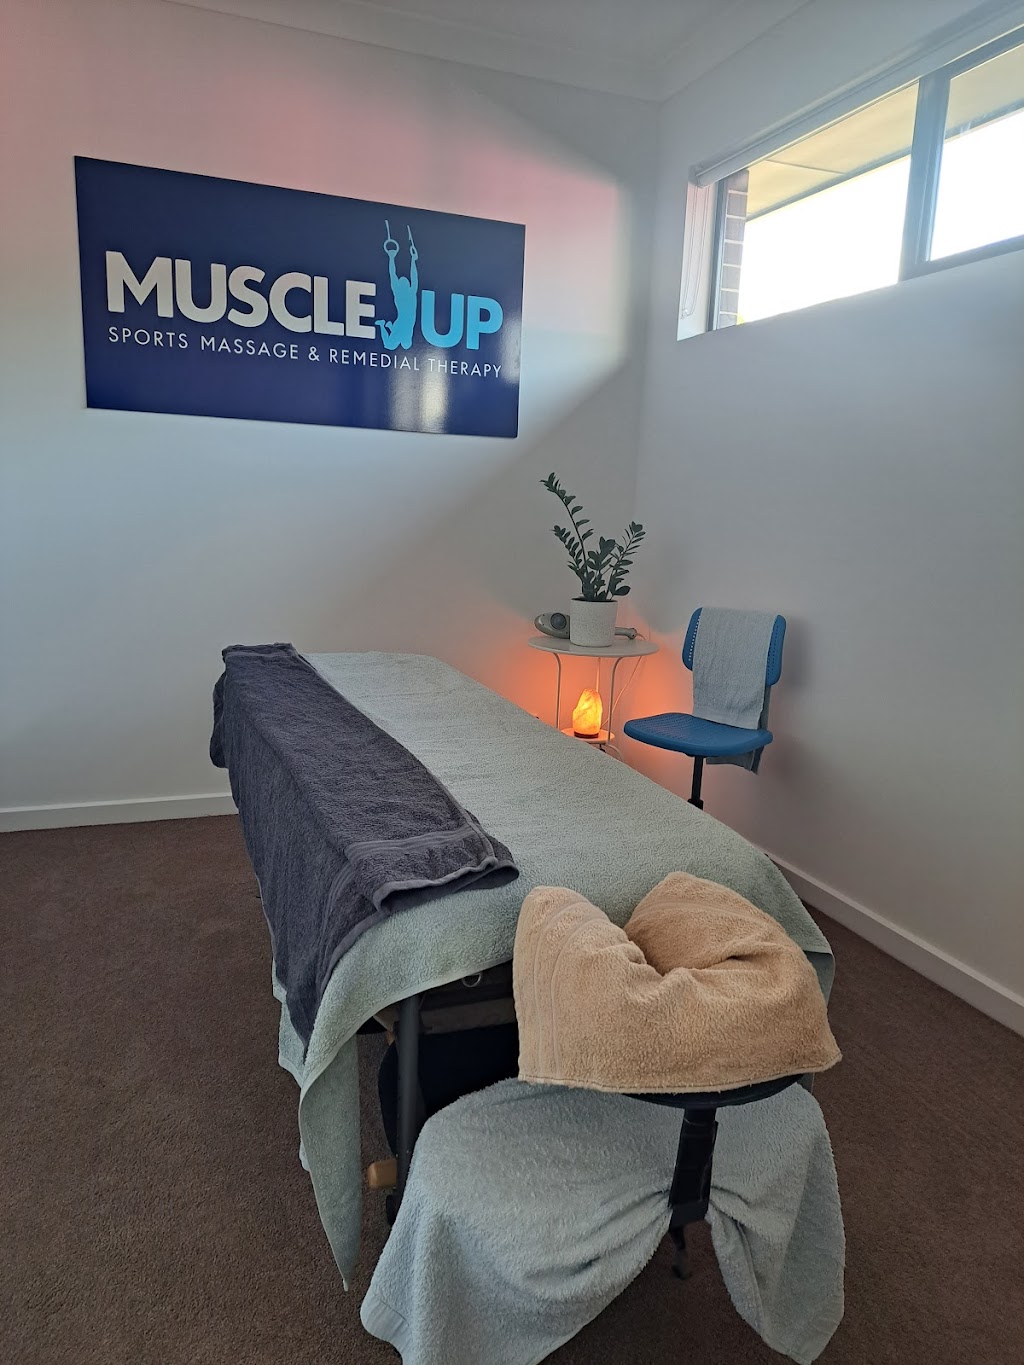 Muscle Up Sports Massage & Remedial Therapy |  | 6 Amhurst Ave, Mount Barker SA 5251, Australia | 0439701750 OR +61 439 701 750